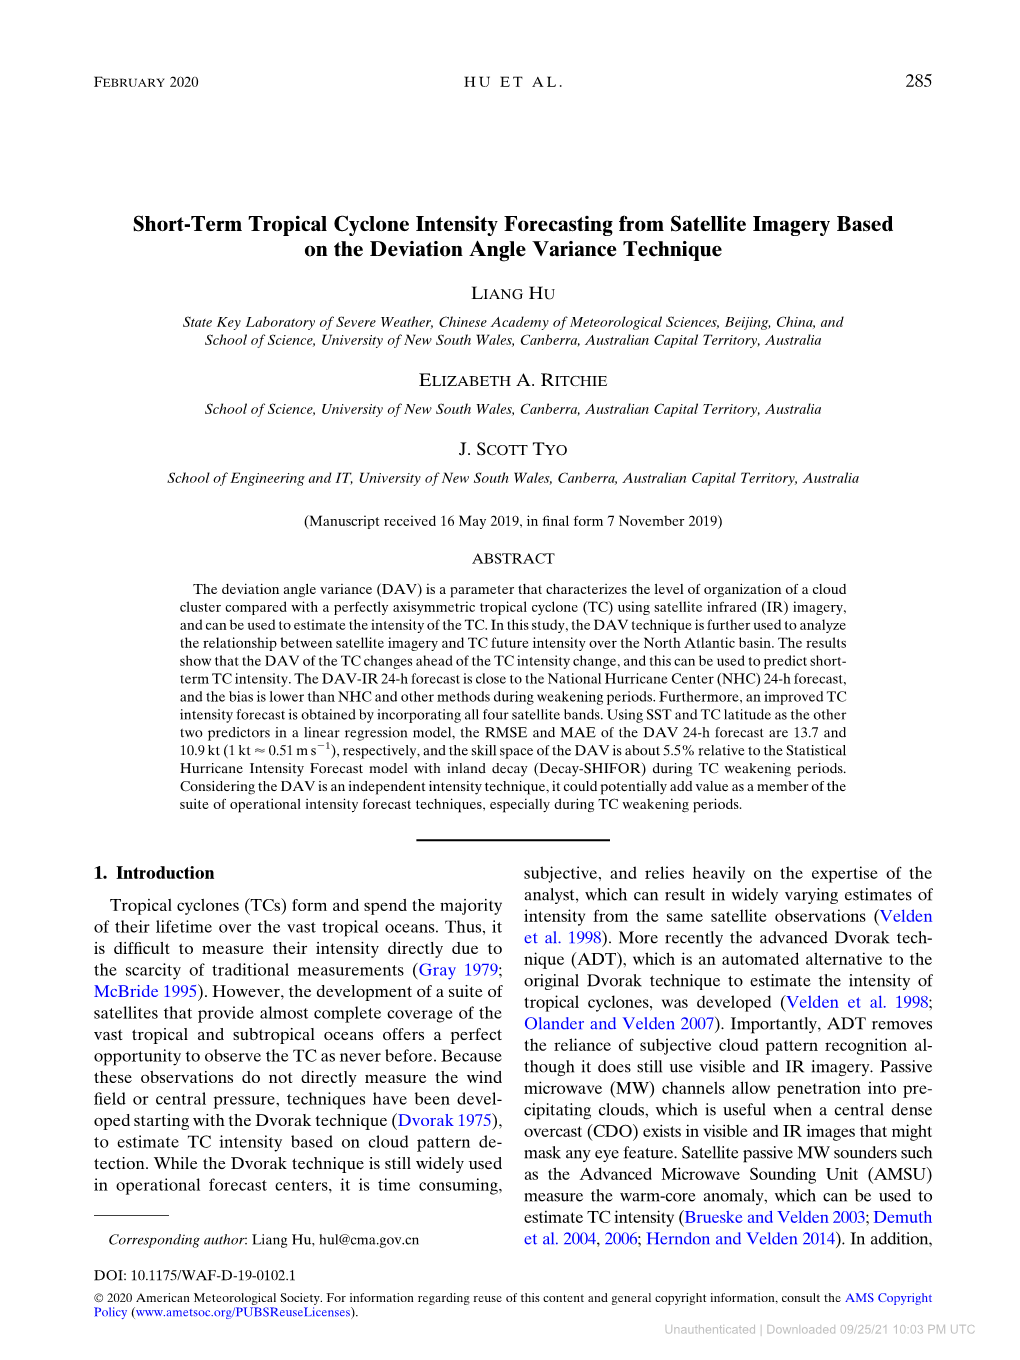 Short-Term Tropical Cyclone Intensity Forecasting from Satellite Imagery Based on the Deviation Angle Variance Technique